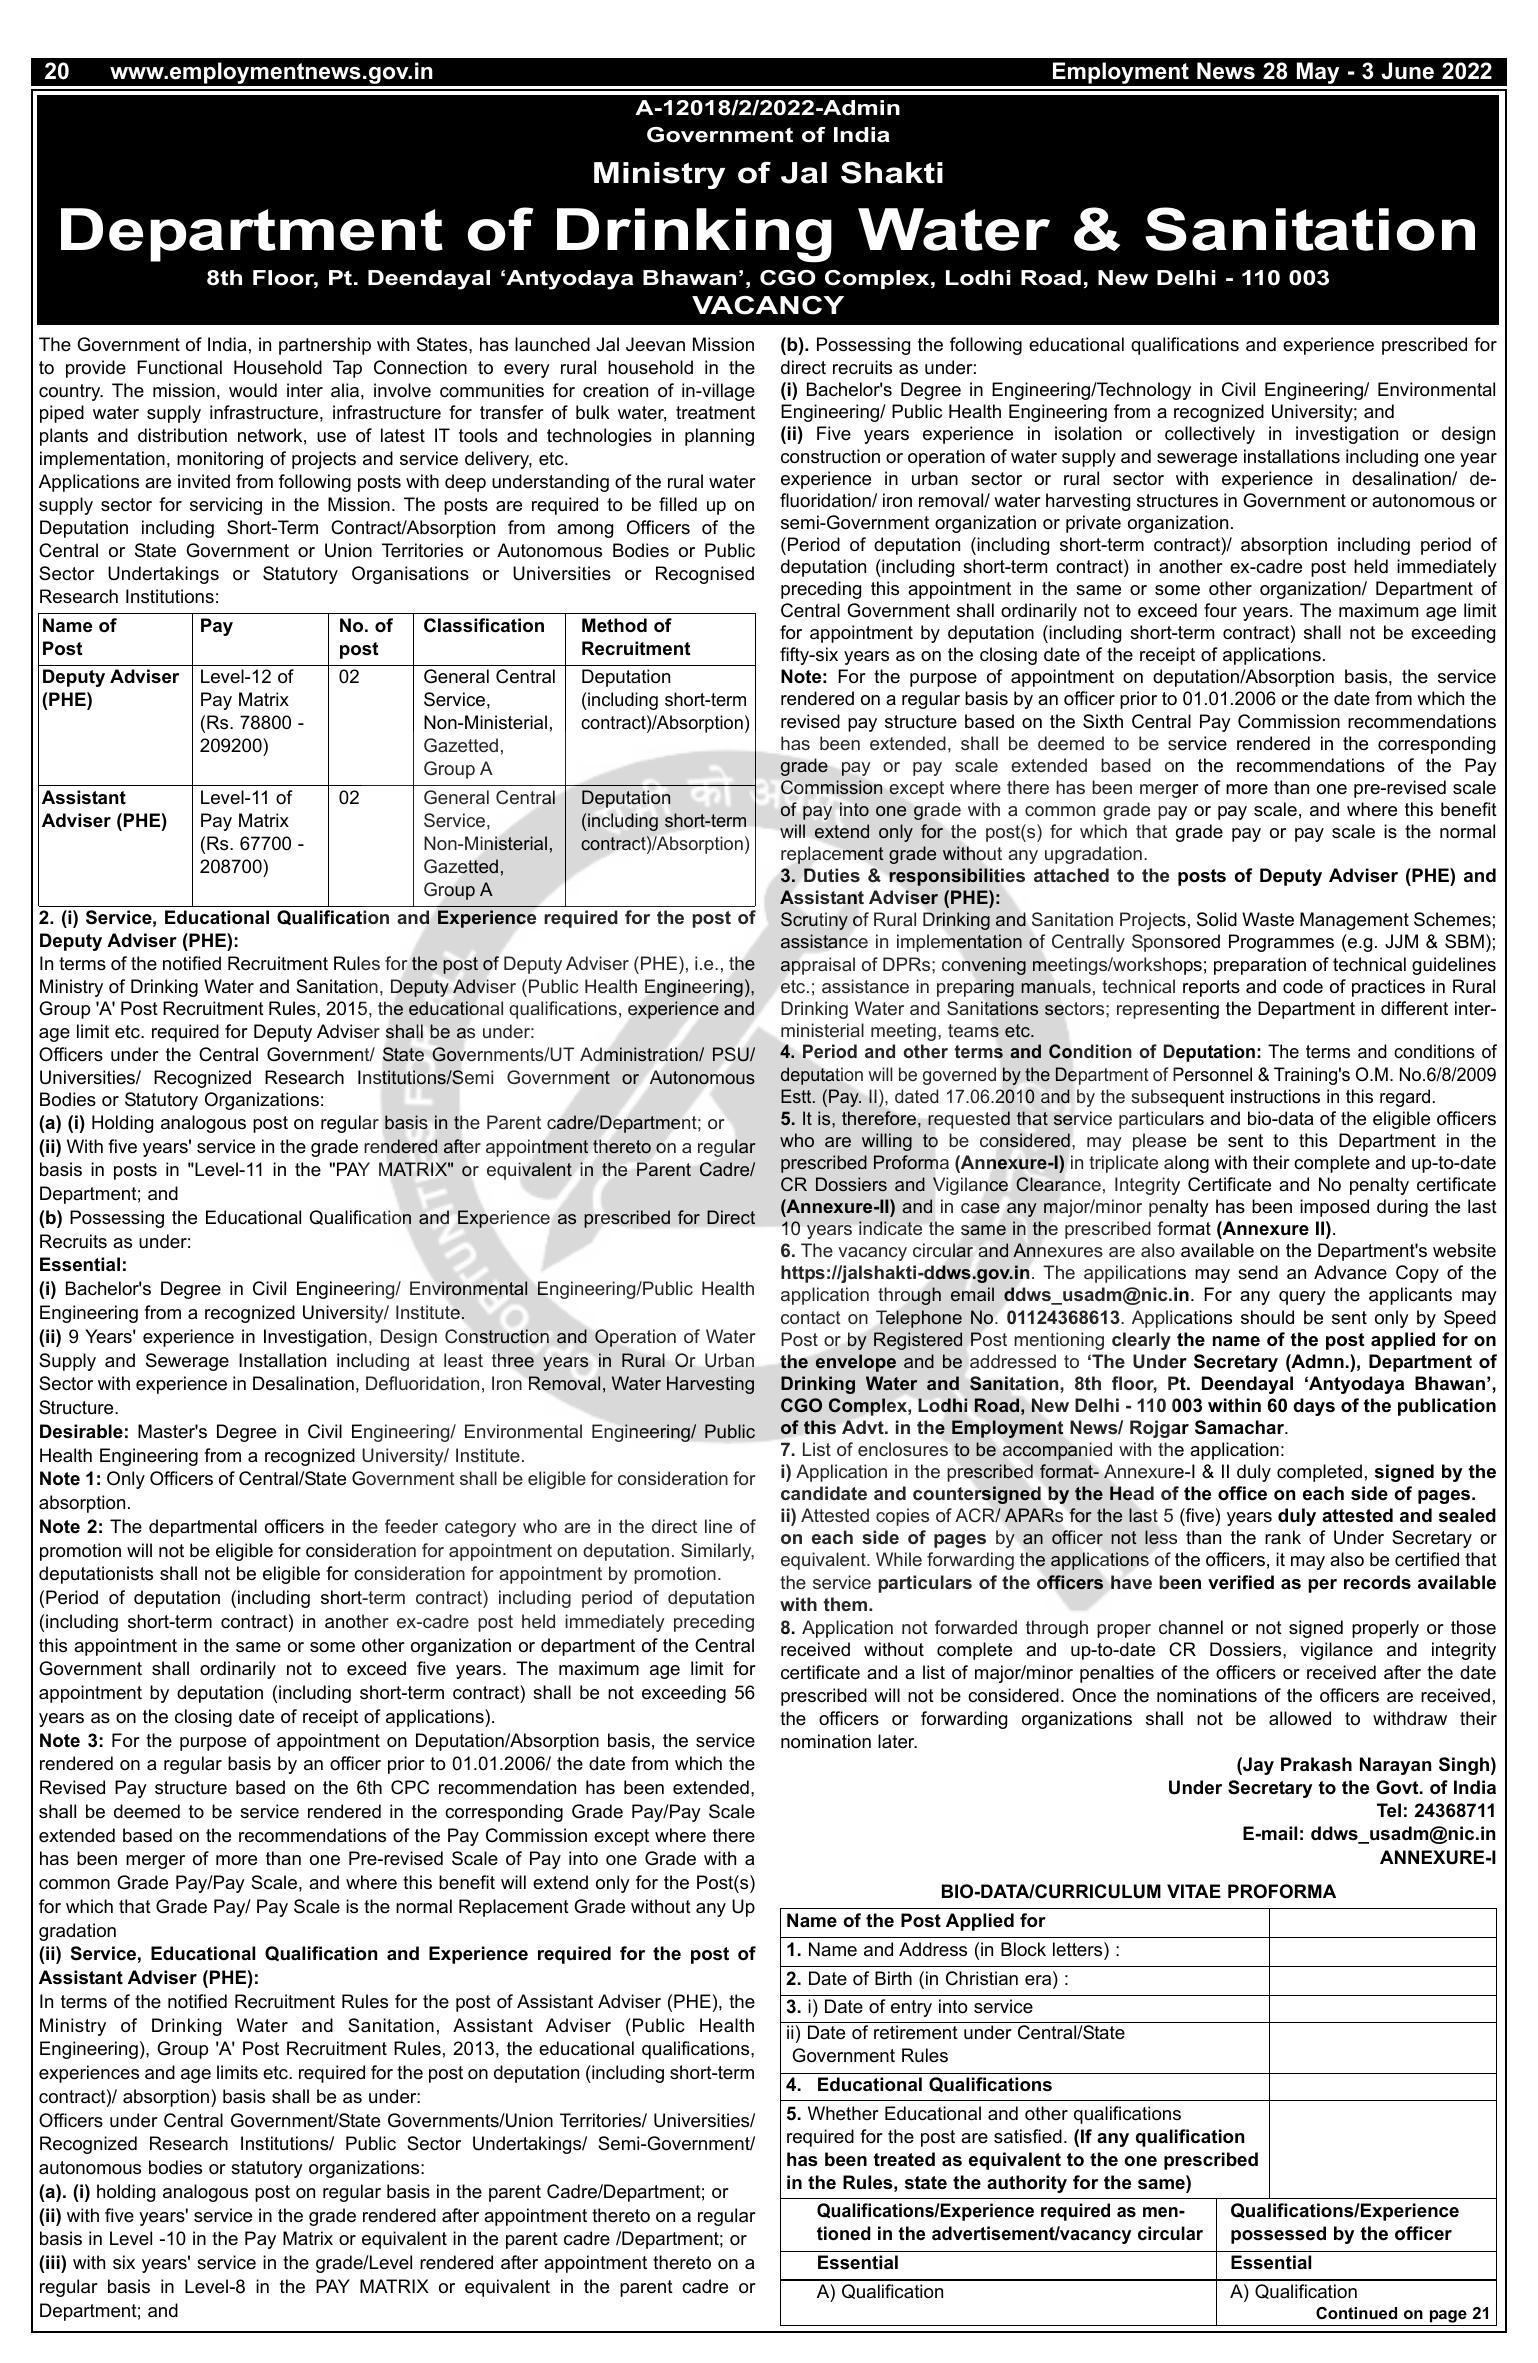 Department of Drinking Water and Sanitation Deputy Adviser, Assistant Adviser Recruitment 2022 - Page 1